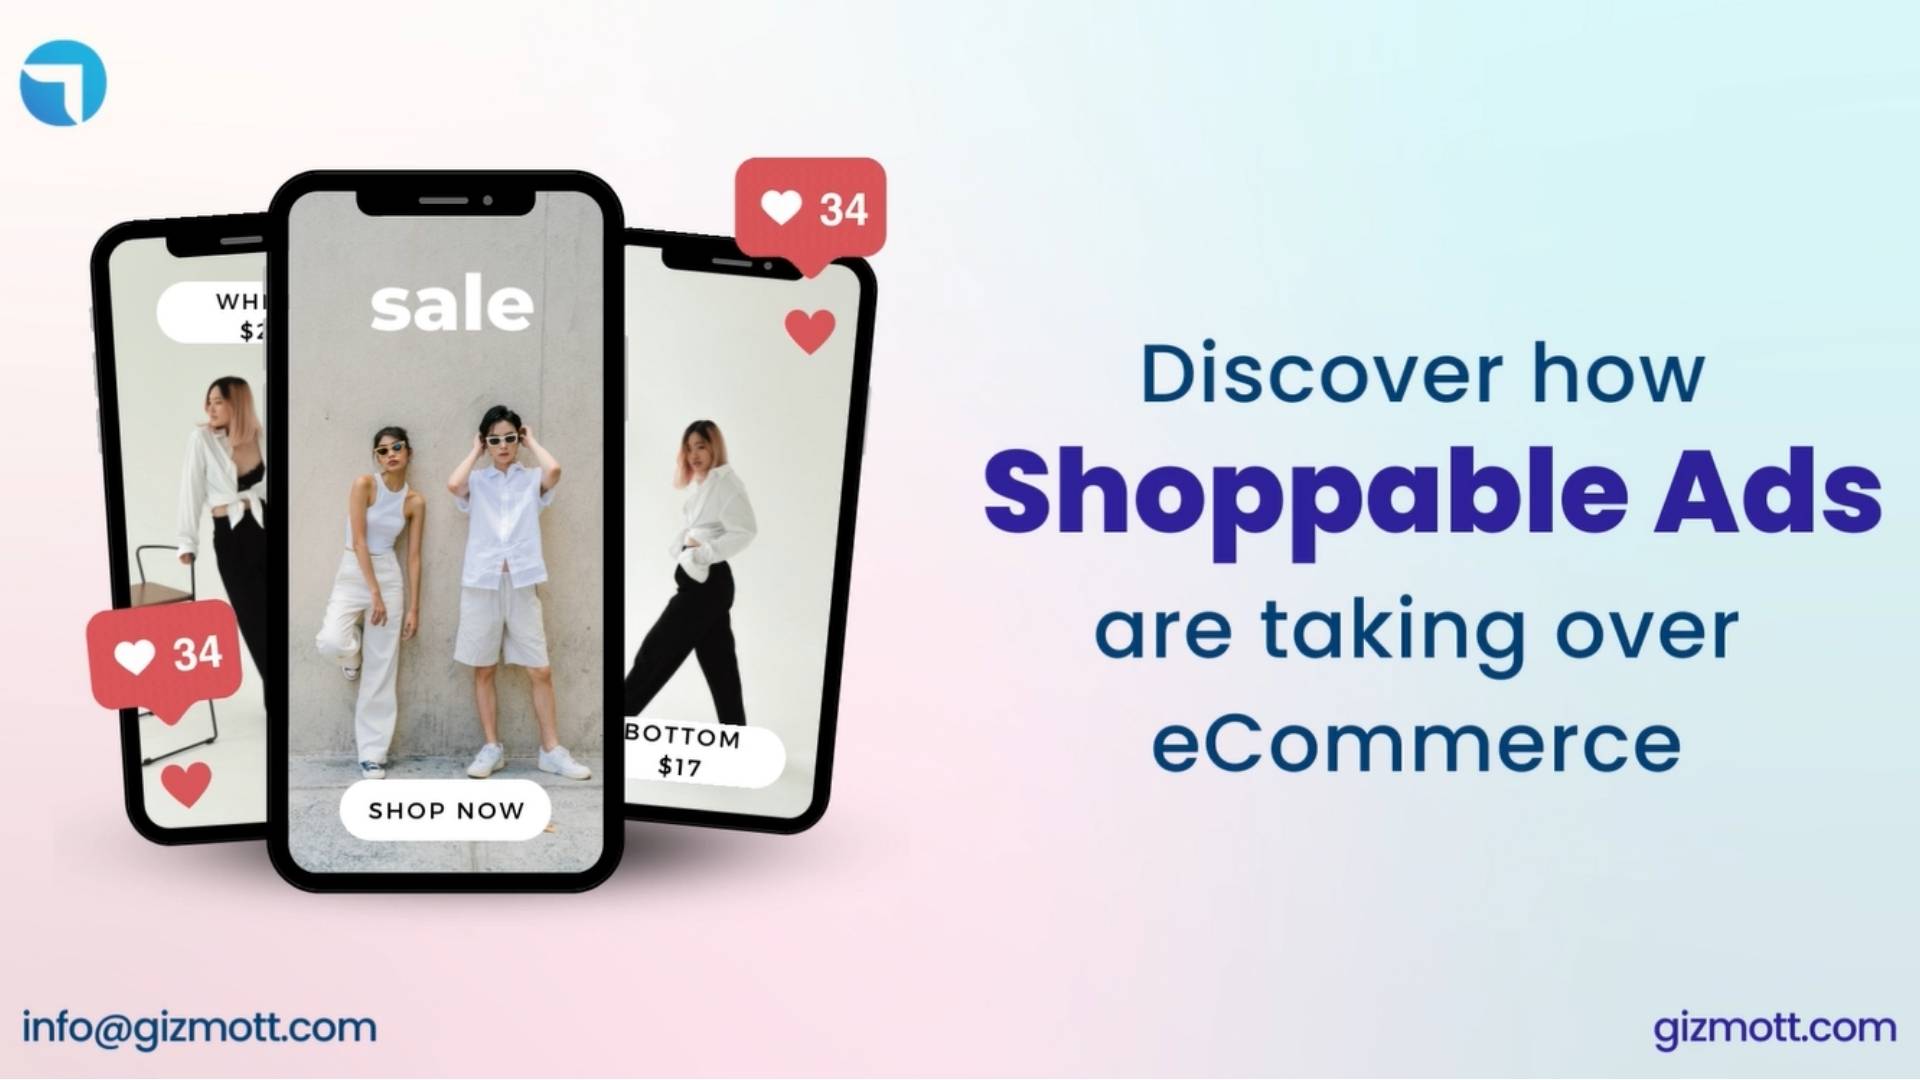 Discover how Shoppable Ads are taking over eCommerce